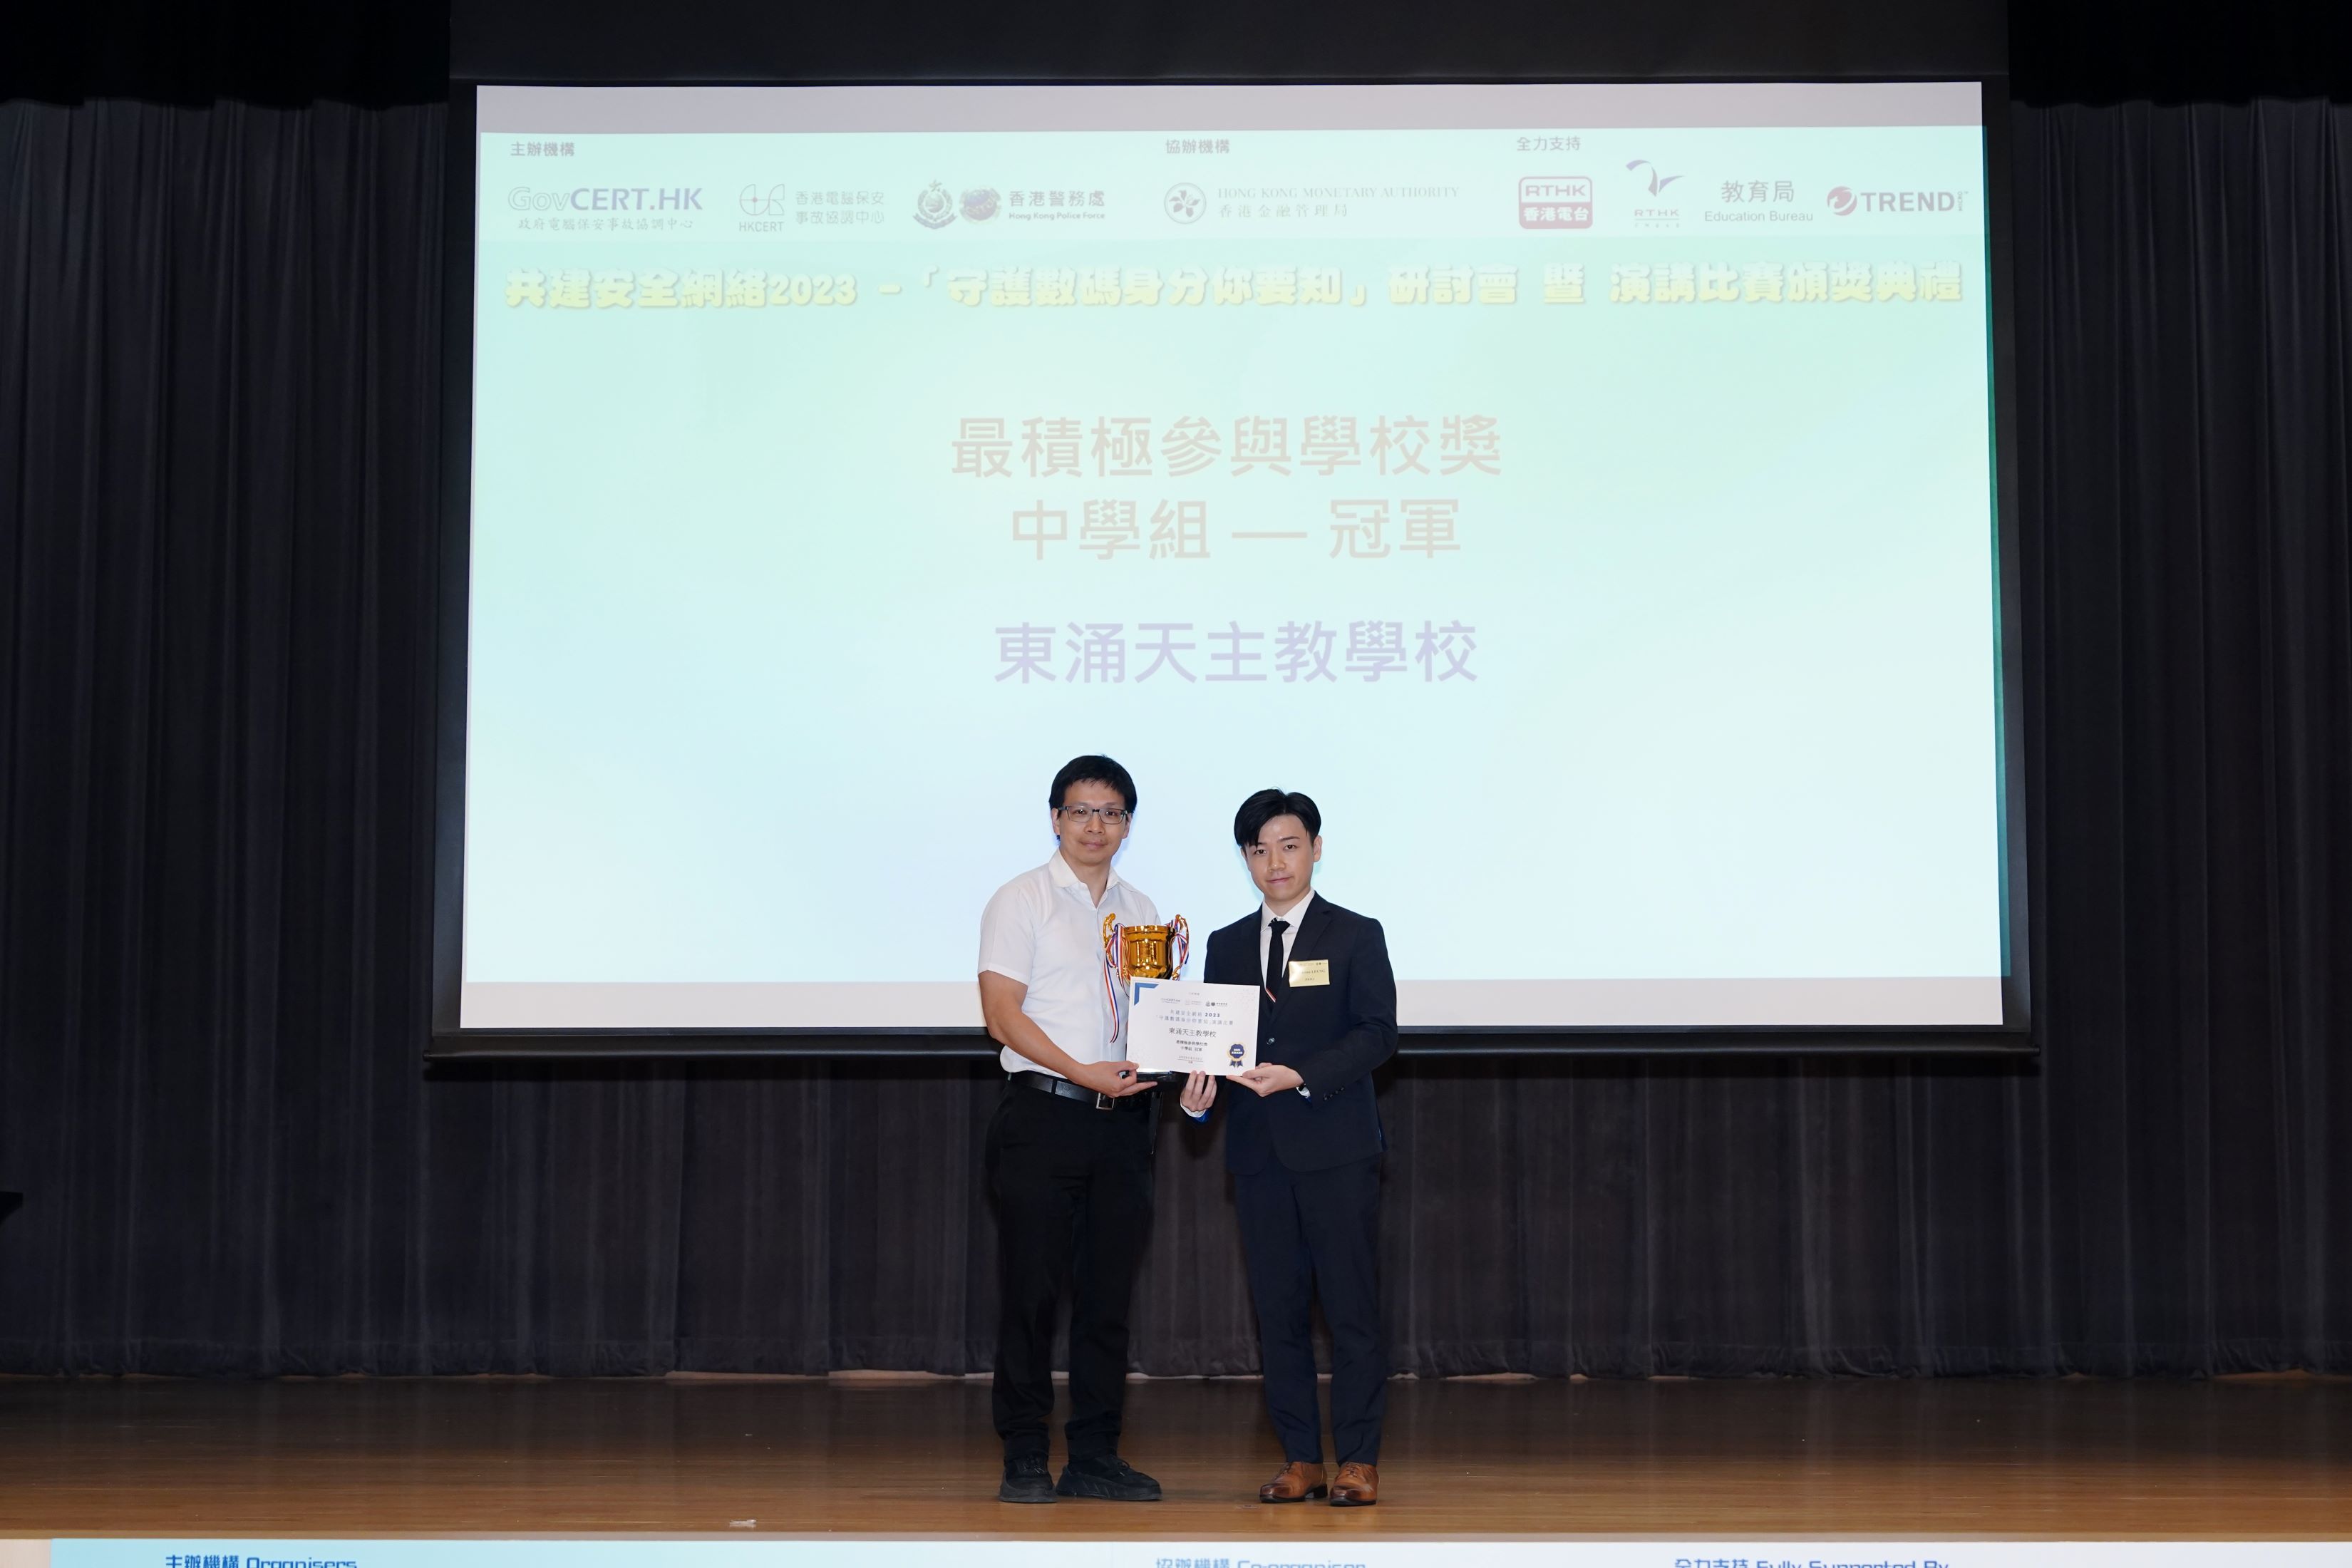 Champion of Most Supportive School Award (Secondary School Category) - Tung Chung Catholic School